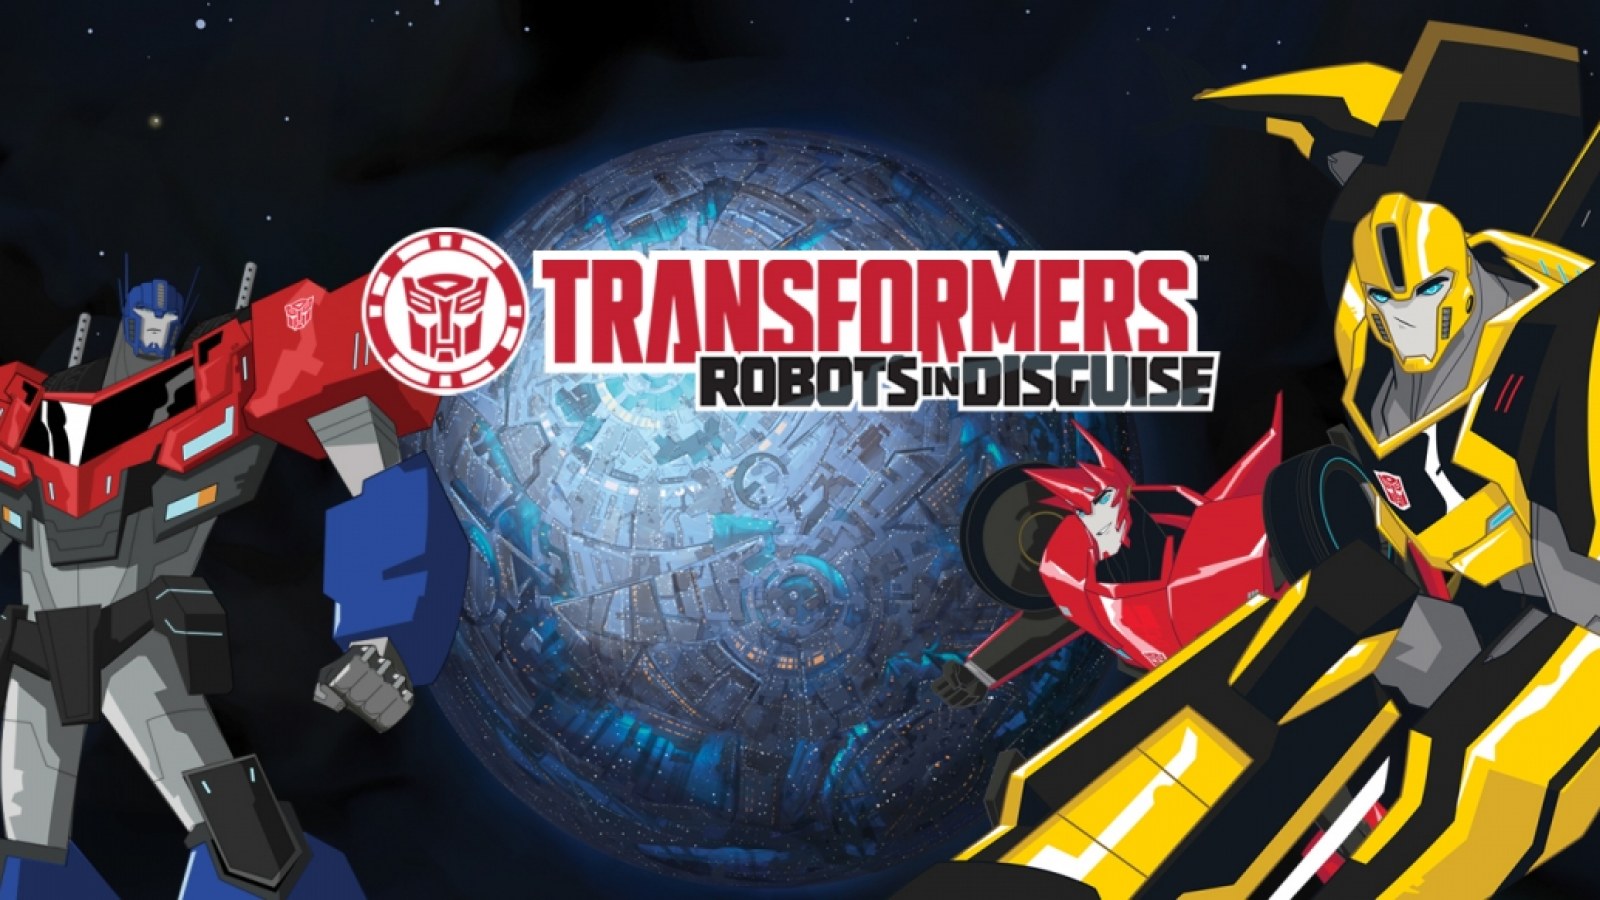 Transformers Robots In Disguise season 2: Bumblebee and his team of Autobots  return with more adventures